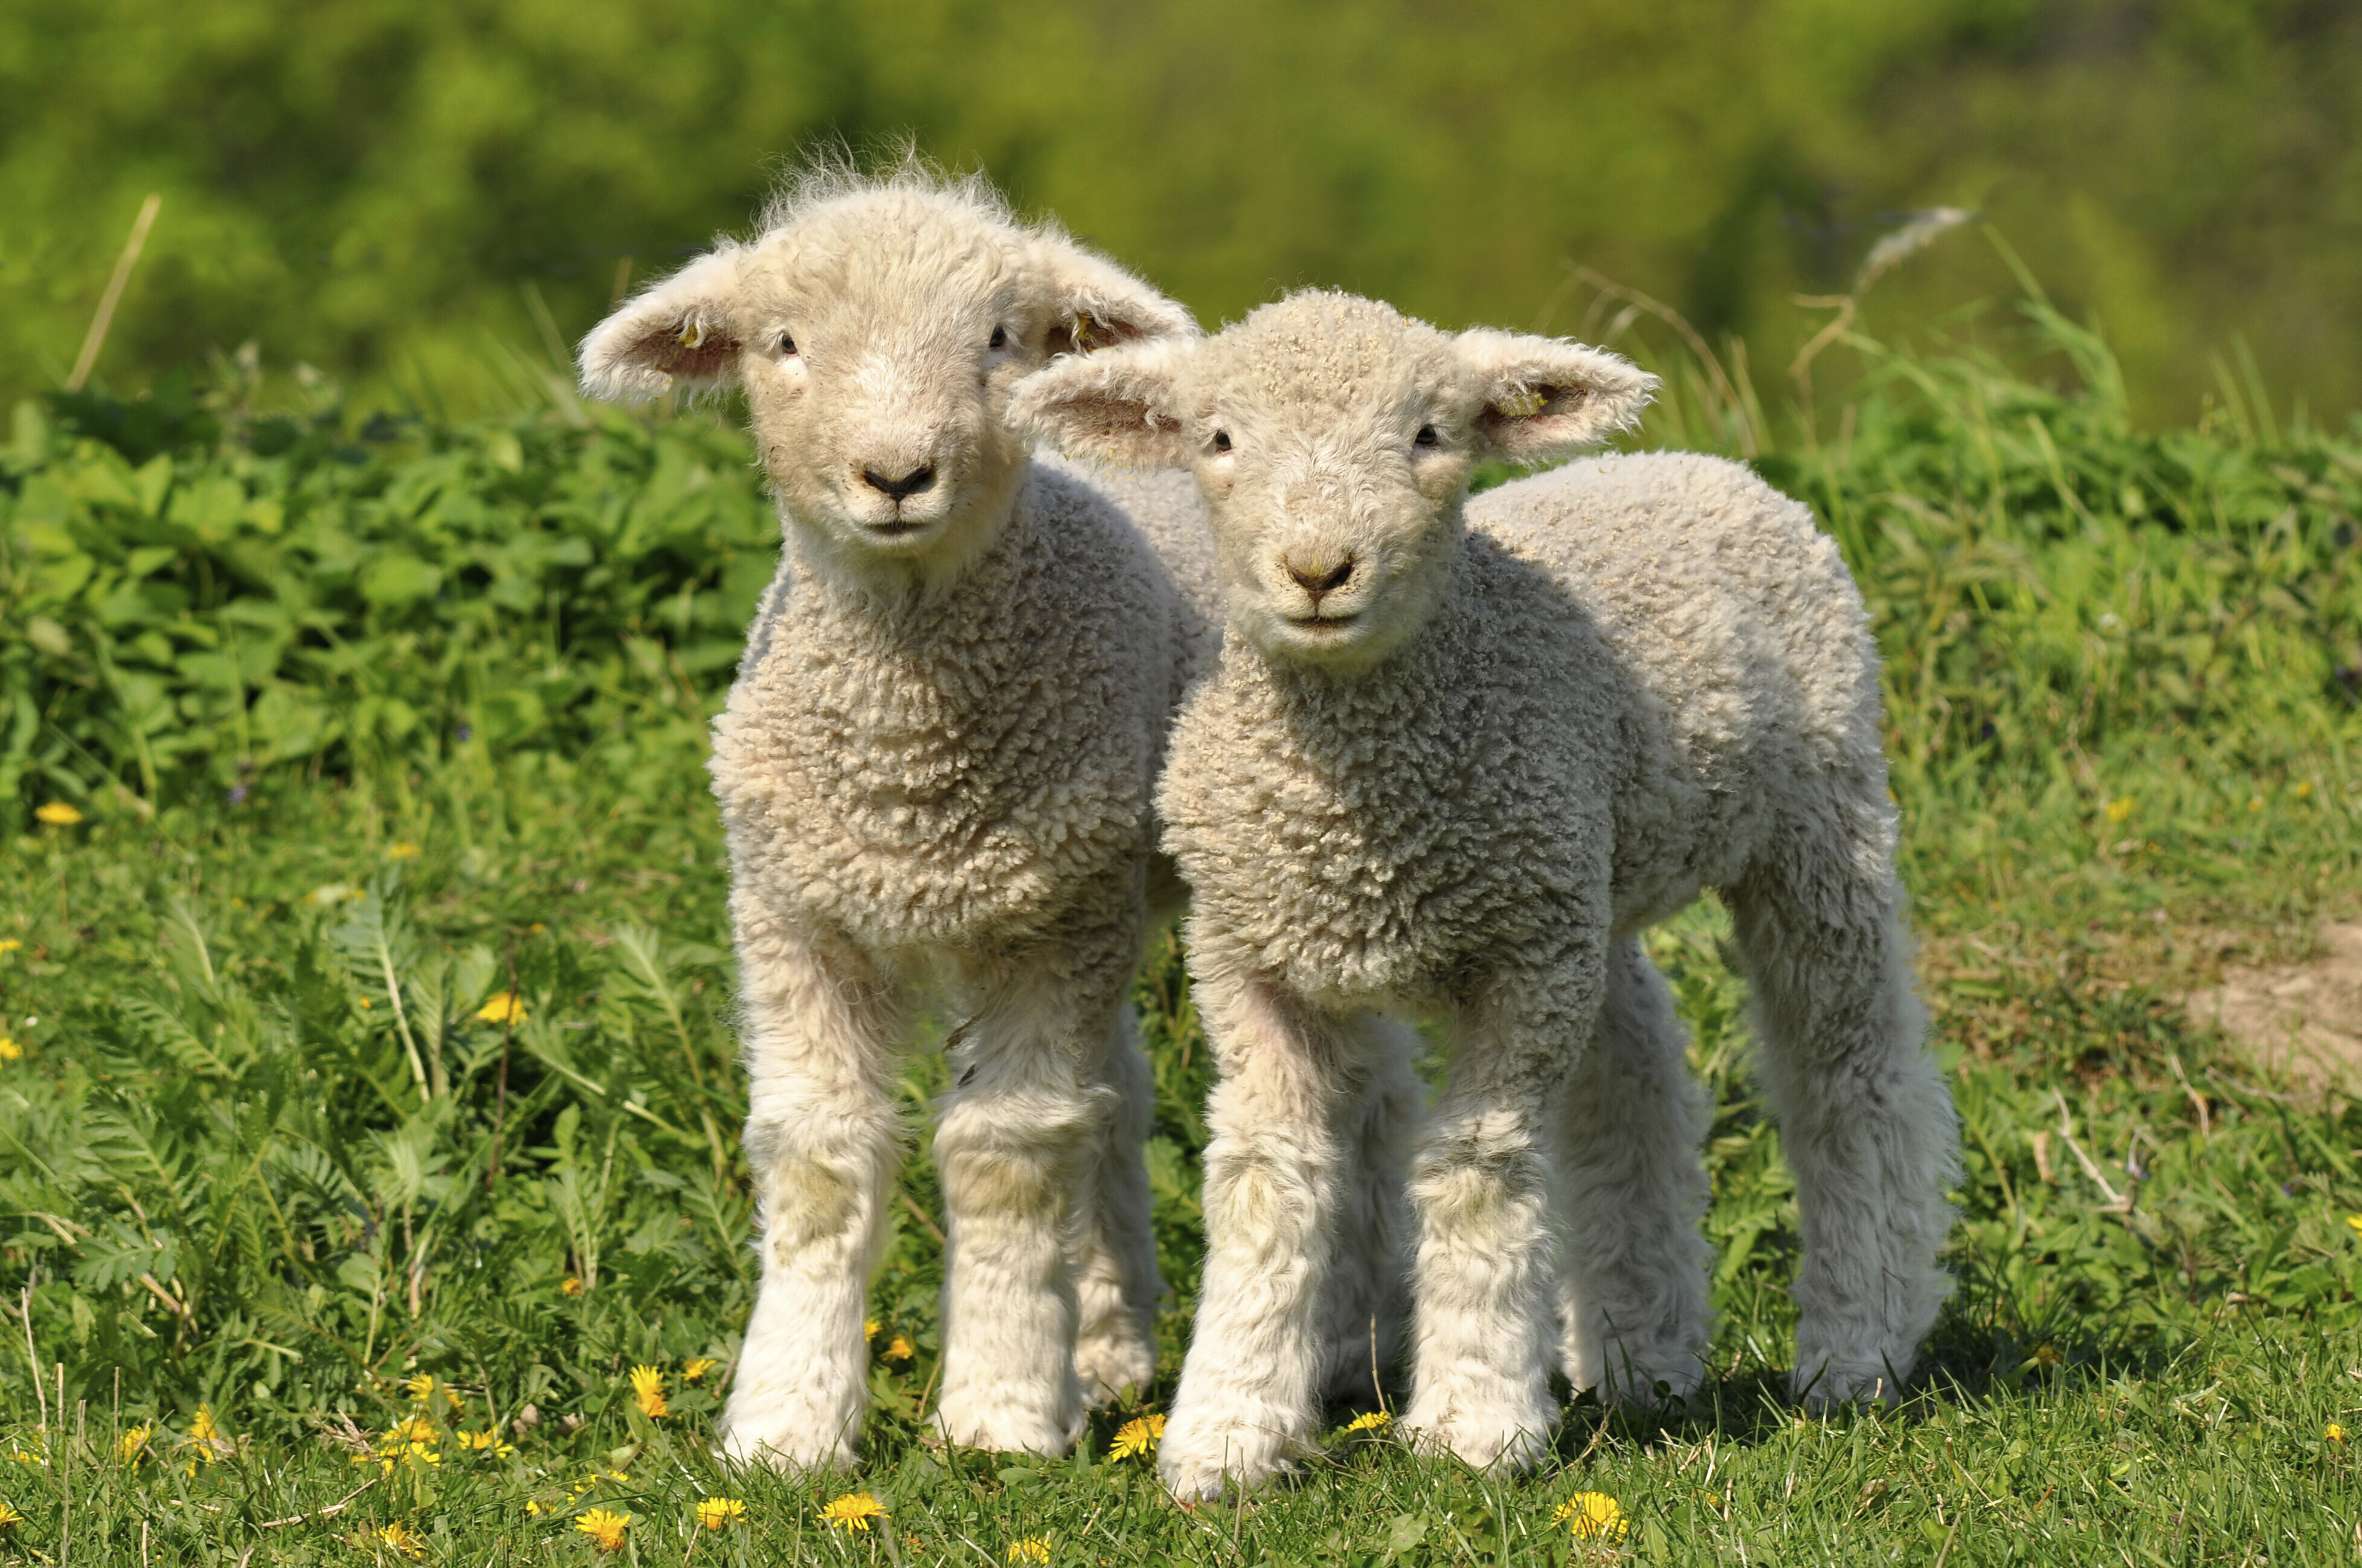 Image: Two little lambs